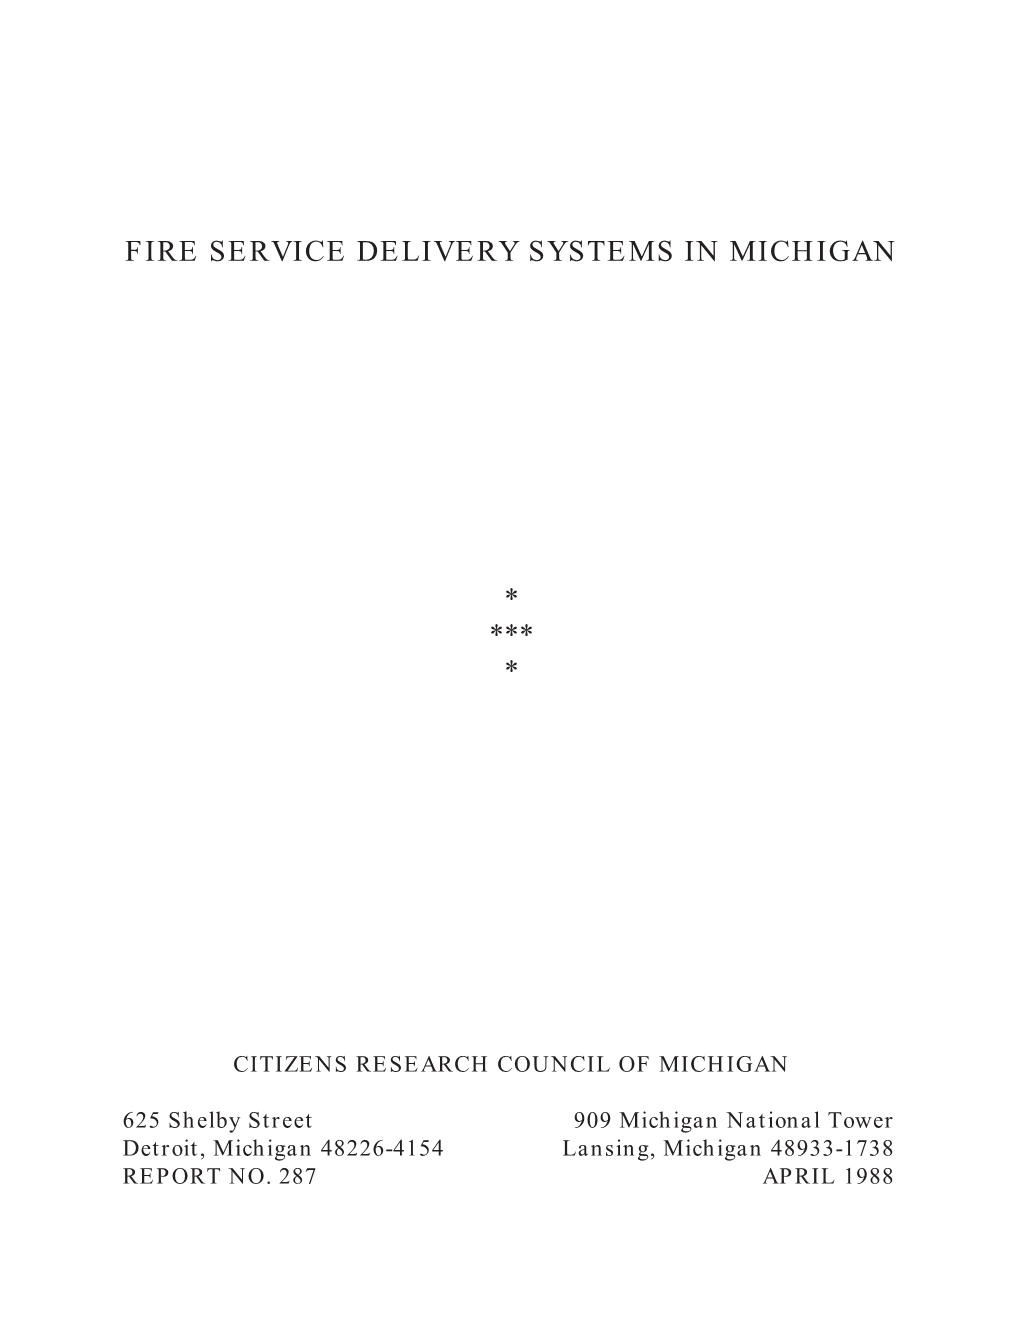 Fire Service Delivery Systems in Michigan